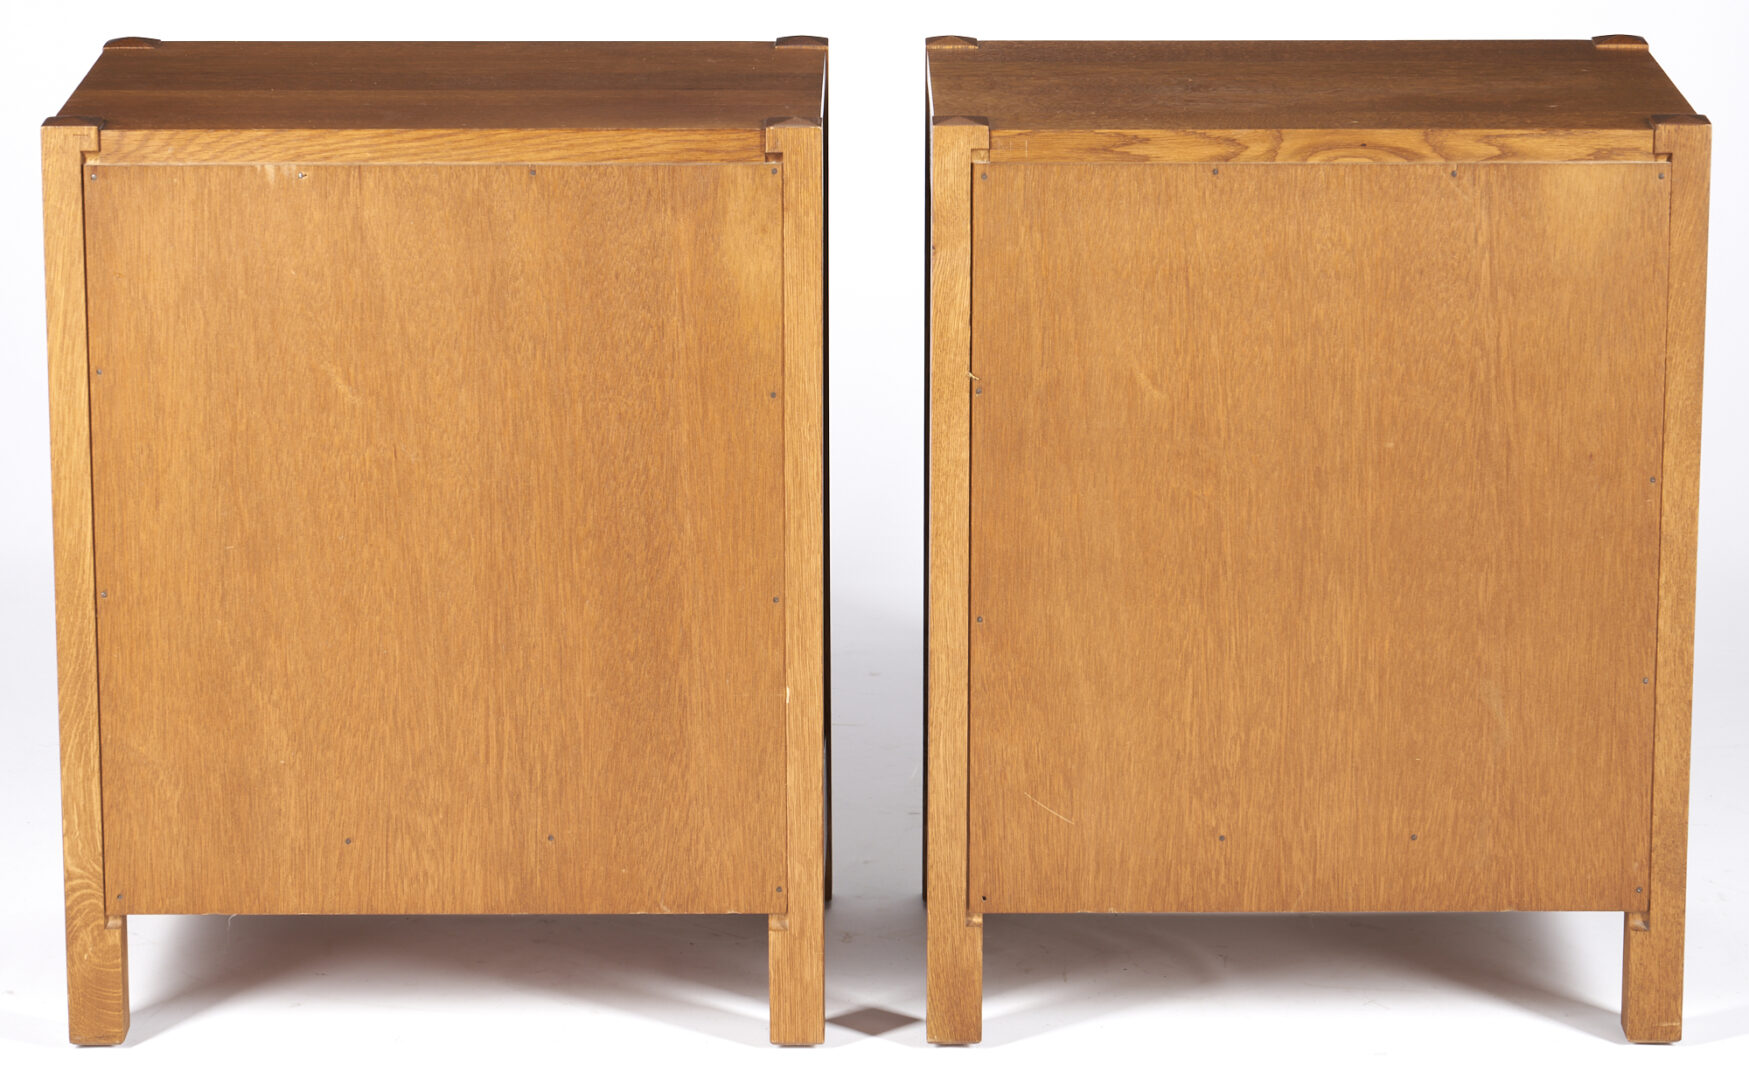 Lot 424: Stickley NY/Audi Mission Night Stands or Bedside Tables, Pair